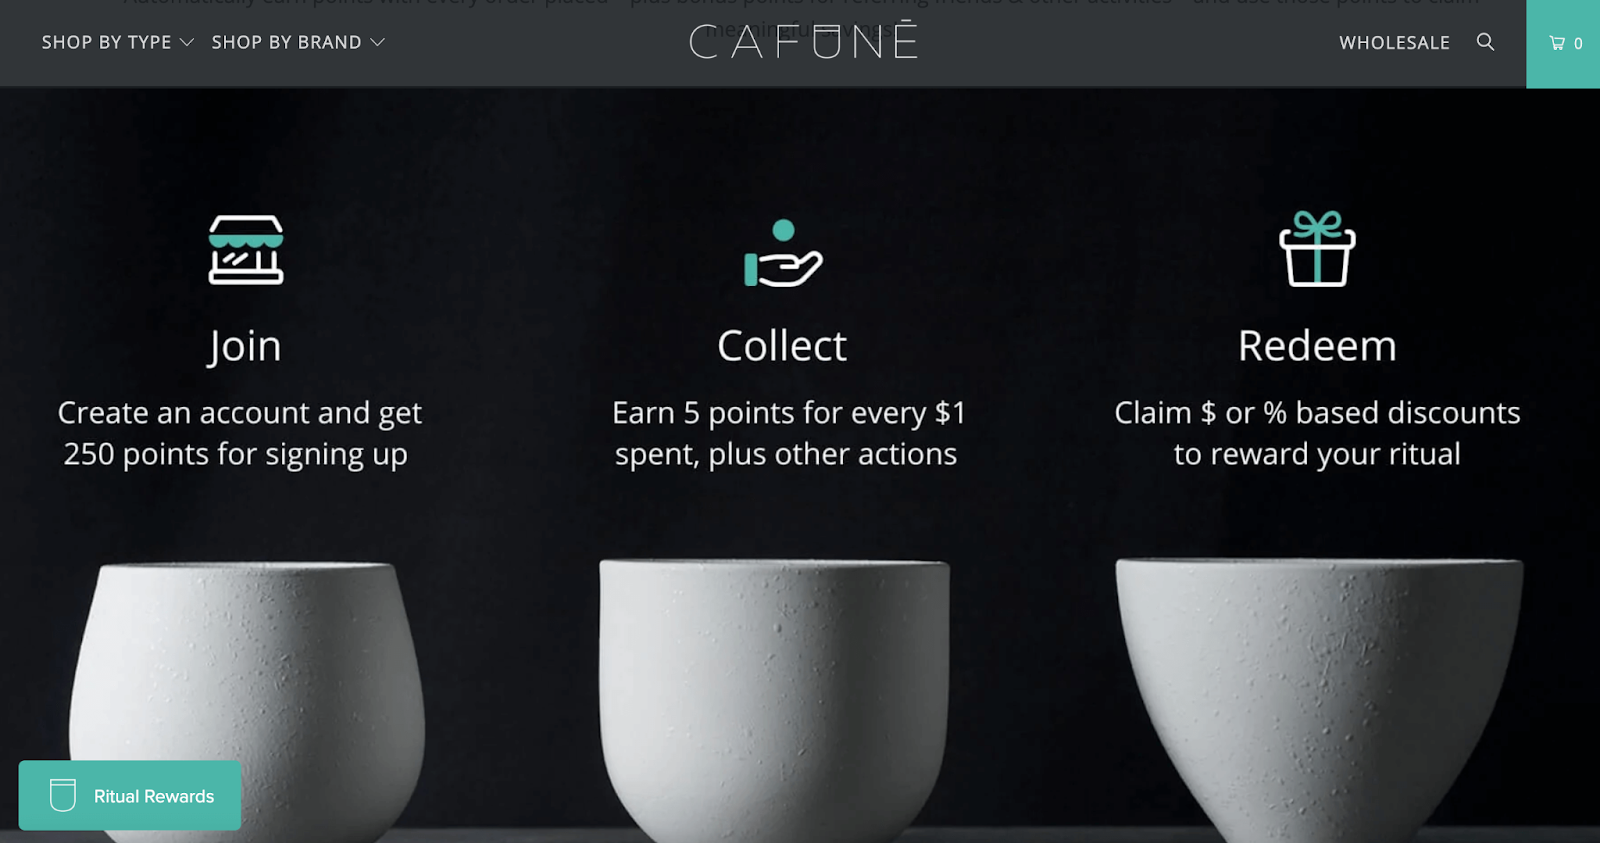 Top 10 Loyalty Programs 2022–A screenshot from Cafuné Boutique’s loyalty program explainer page. There is an image of three white, modern cups on a black background. Above each cup is an icon and a description of a step in the loyalty program process. They are: an icon of a storefront for ‘Join. Create an account and get 250 points for signing up,’, an icon of a hand collecting a coin for ‘Collect. Earn 5 points for every $1 spent, plus other actions’, and a gift box for ‘Redeem. Claim $ or % based discounts to reward your ritual’. At the bottom of the page, their teal rewards program launcher is visible and says ‘Ritual Rewards’. 